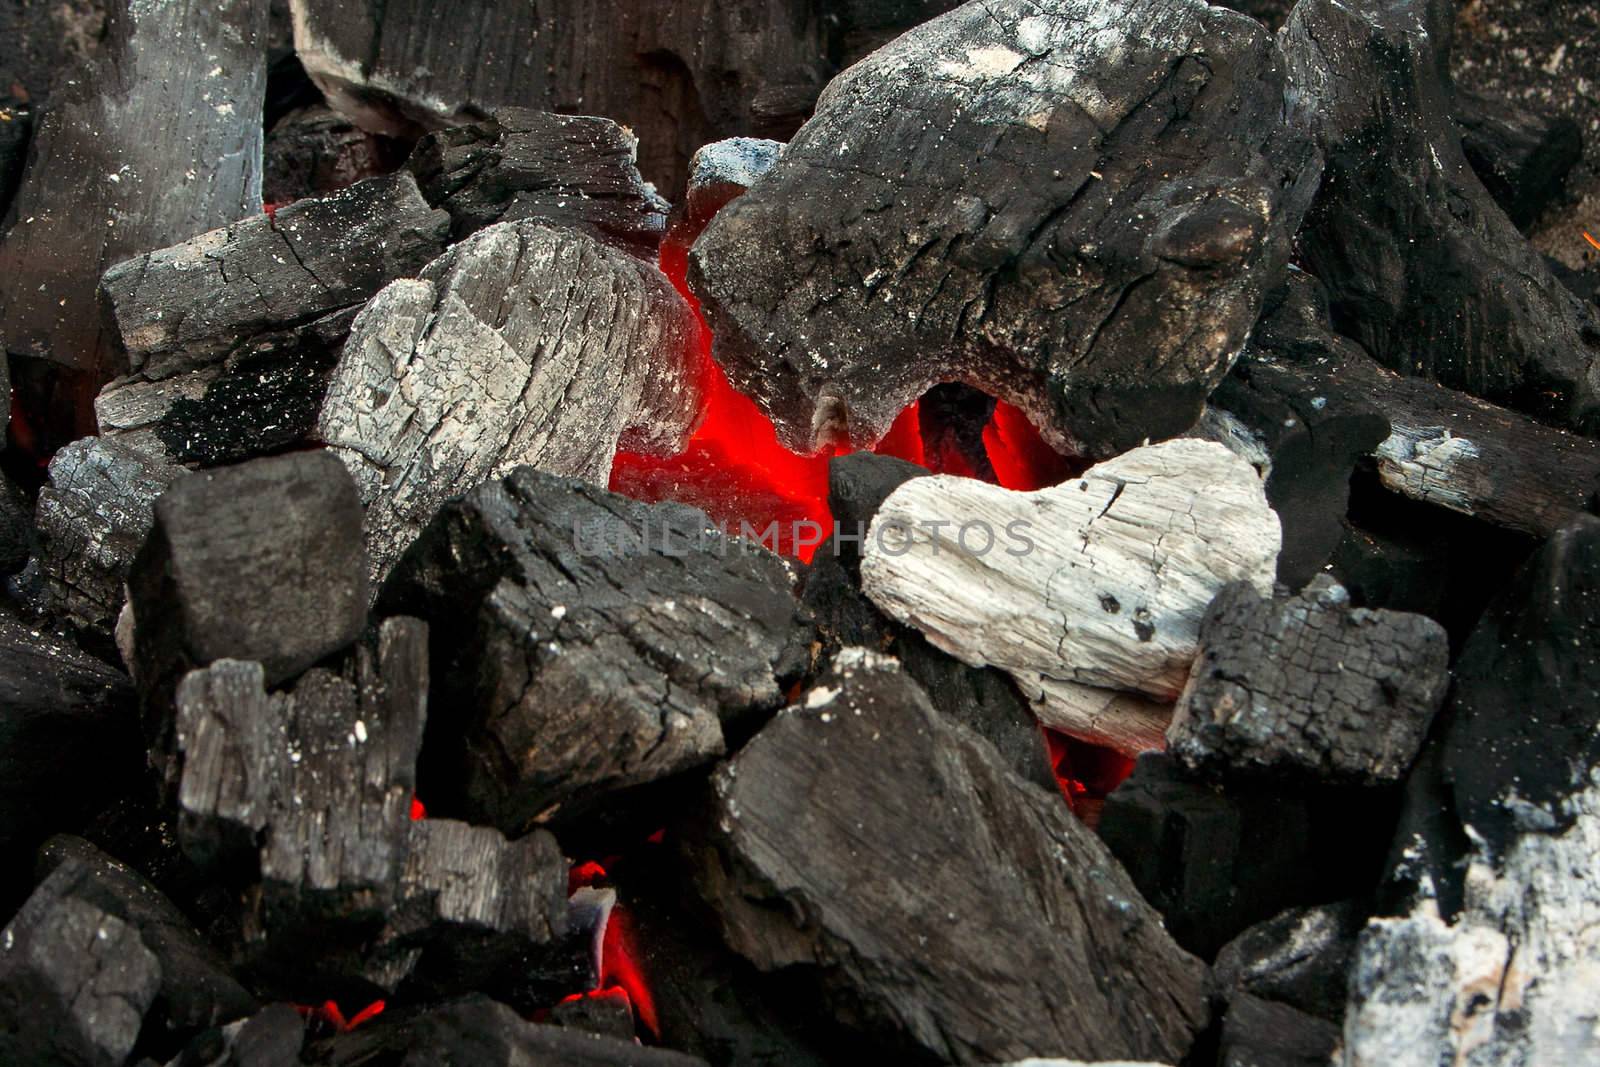 Close up of burning coals on a barbecue